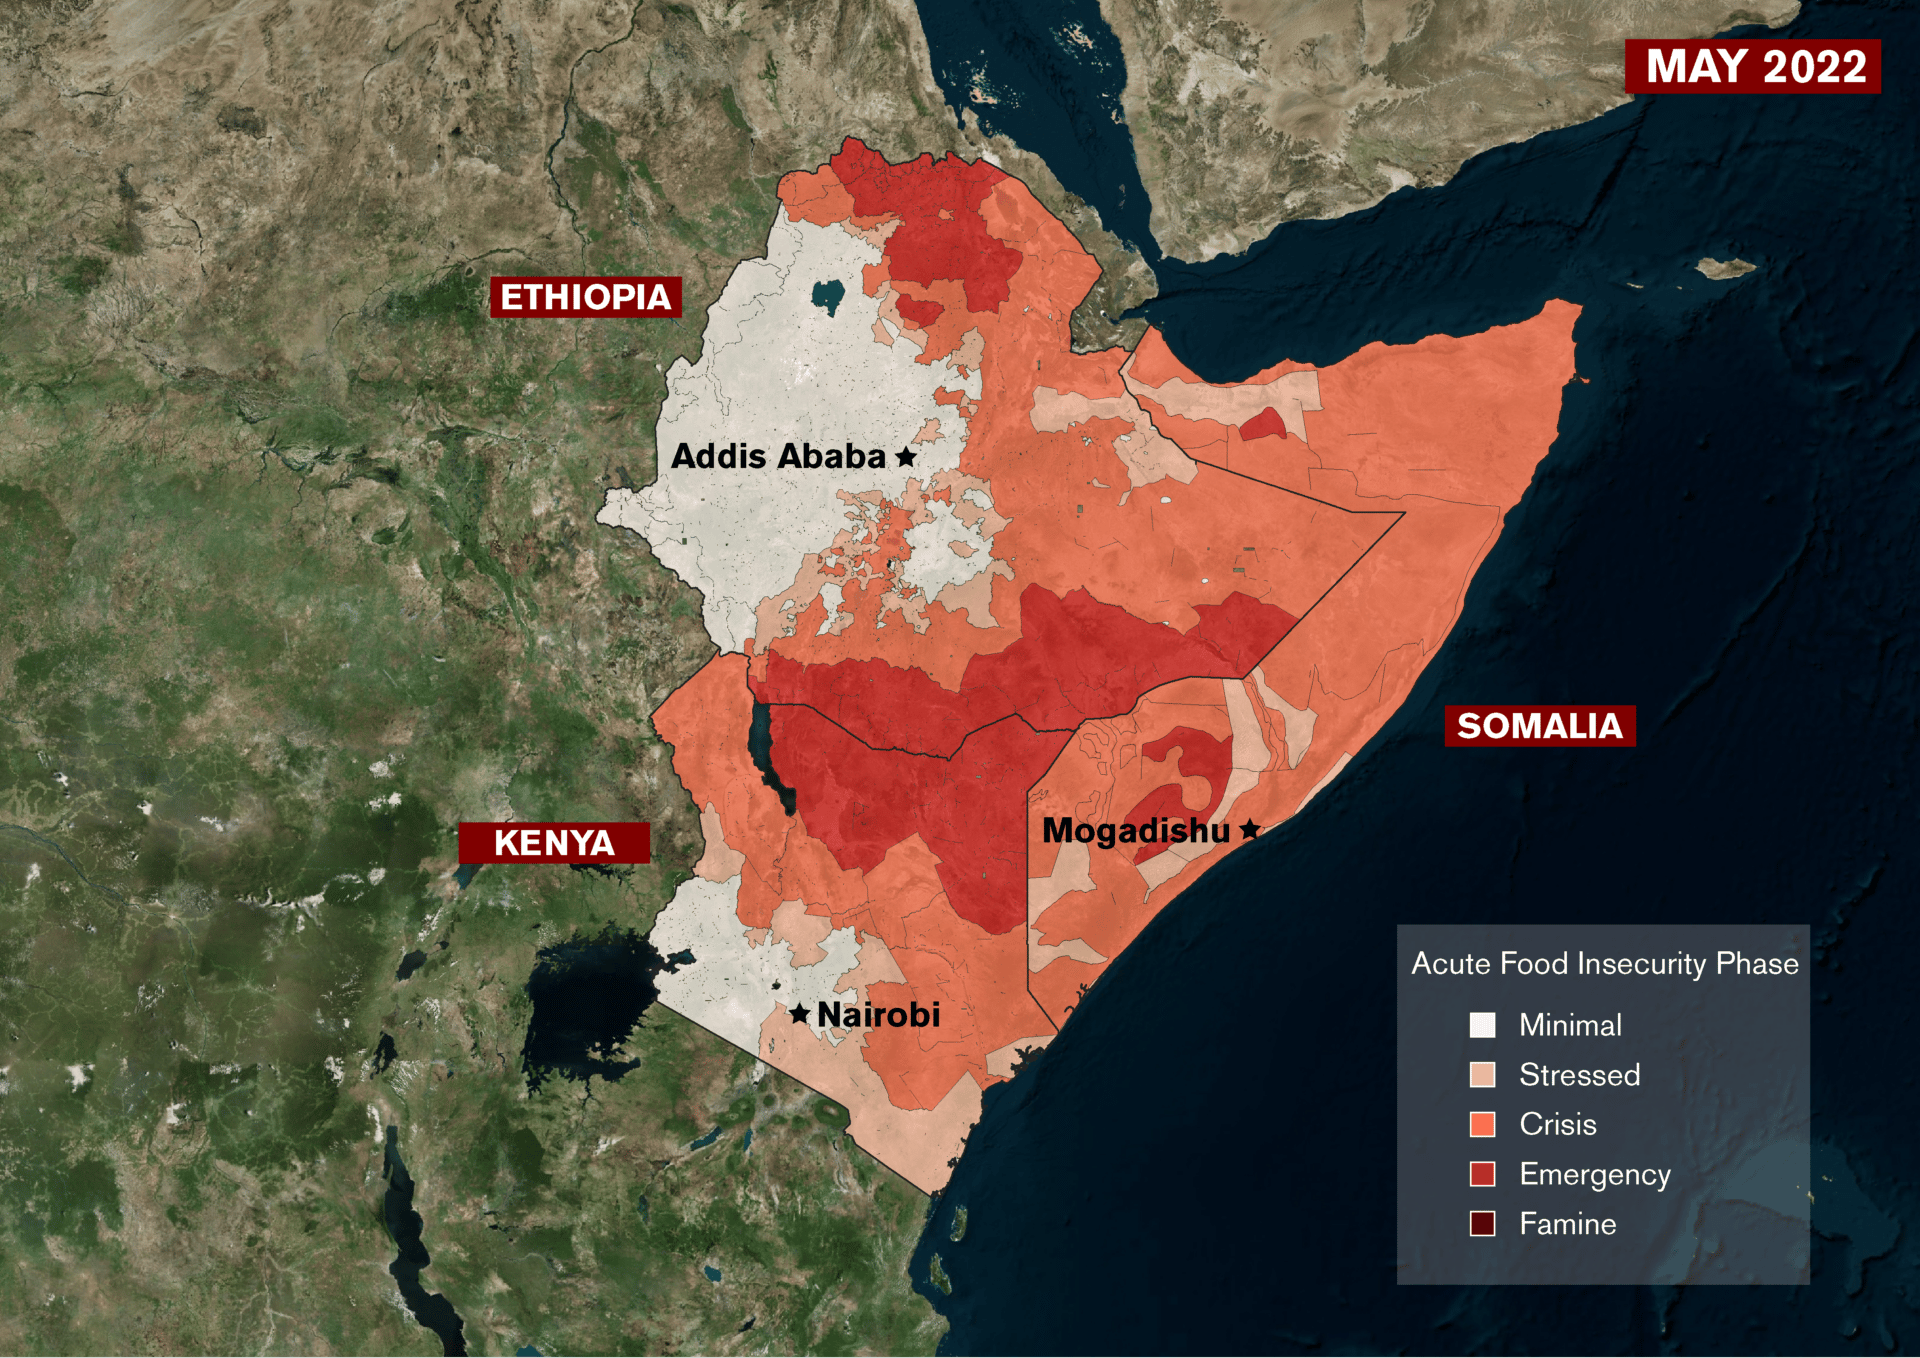 More than 18 million people across Kenya, Ethiopia, and Somalia are classified as food insecure. In Ethiopia, the drought is affecting the southern and eastern regions, while in Kenya the northern pastoral regions are most affected. Virtually all of Somalia is affected by the drought.